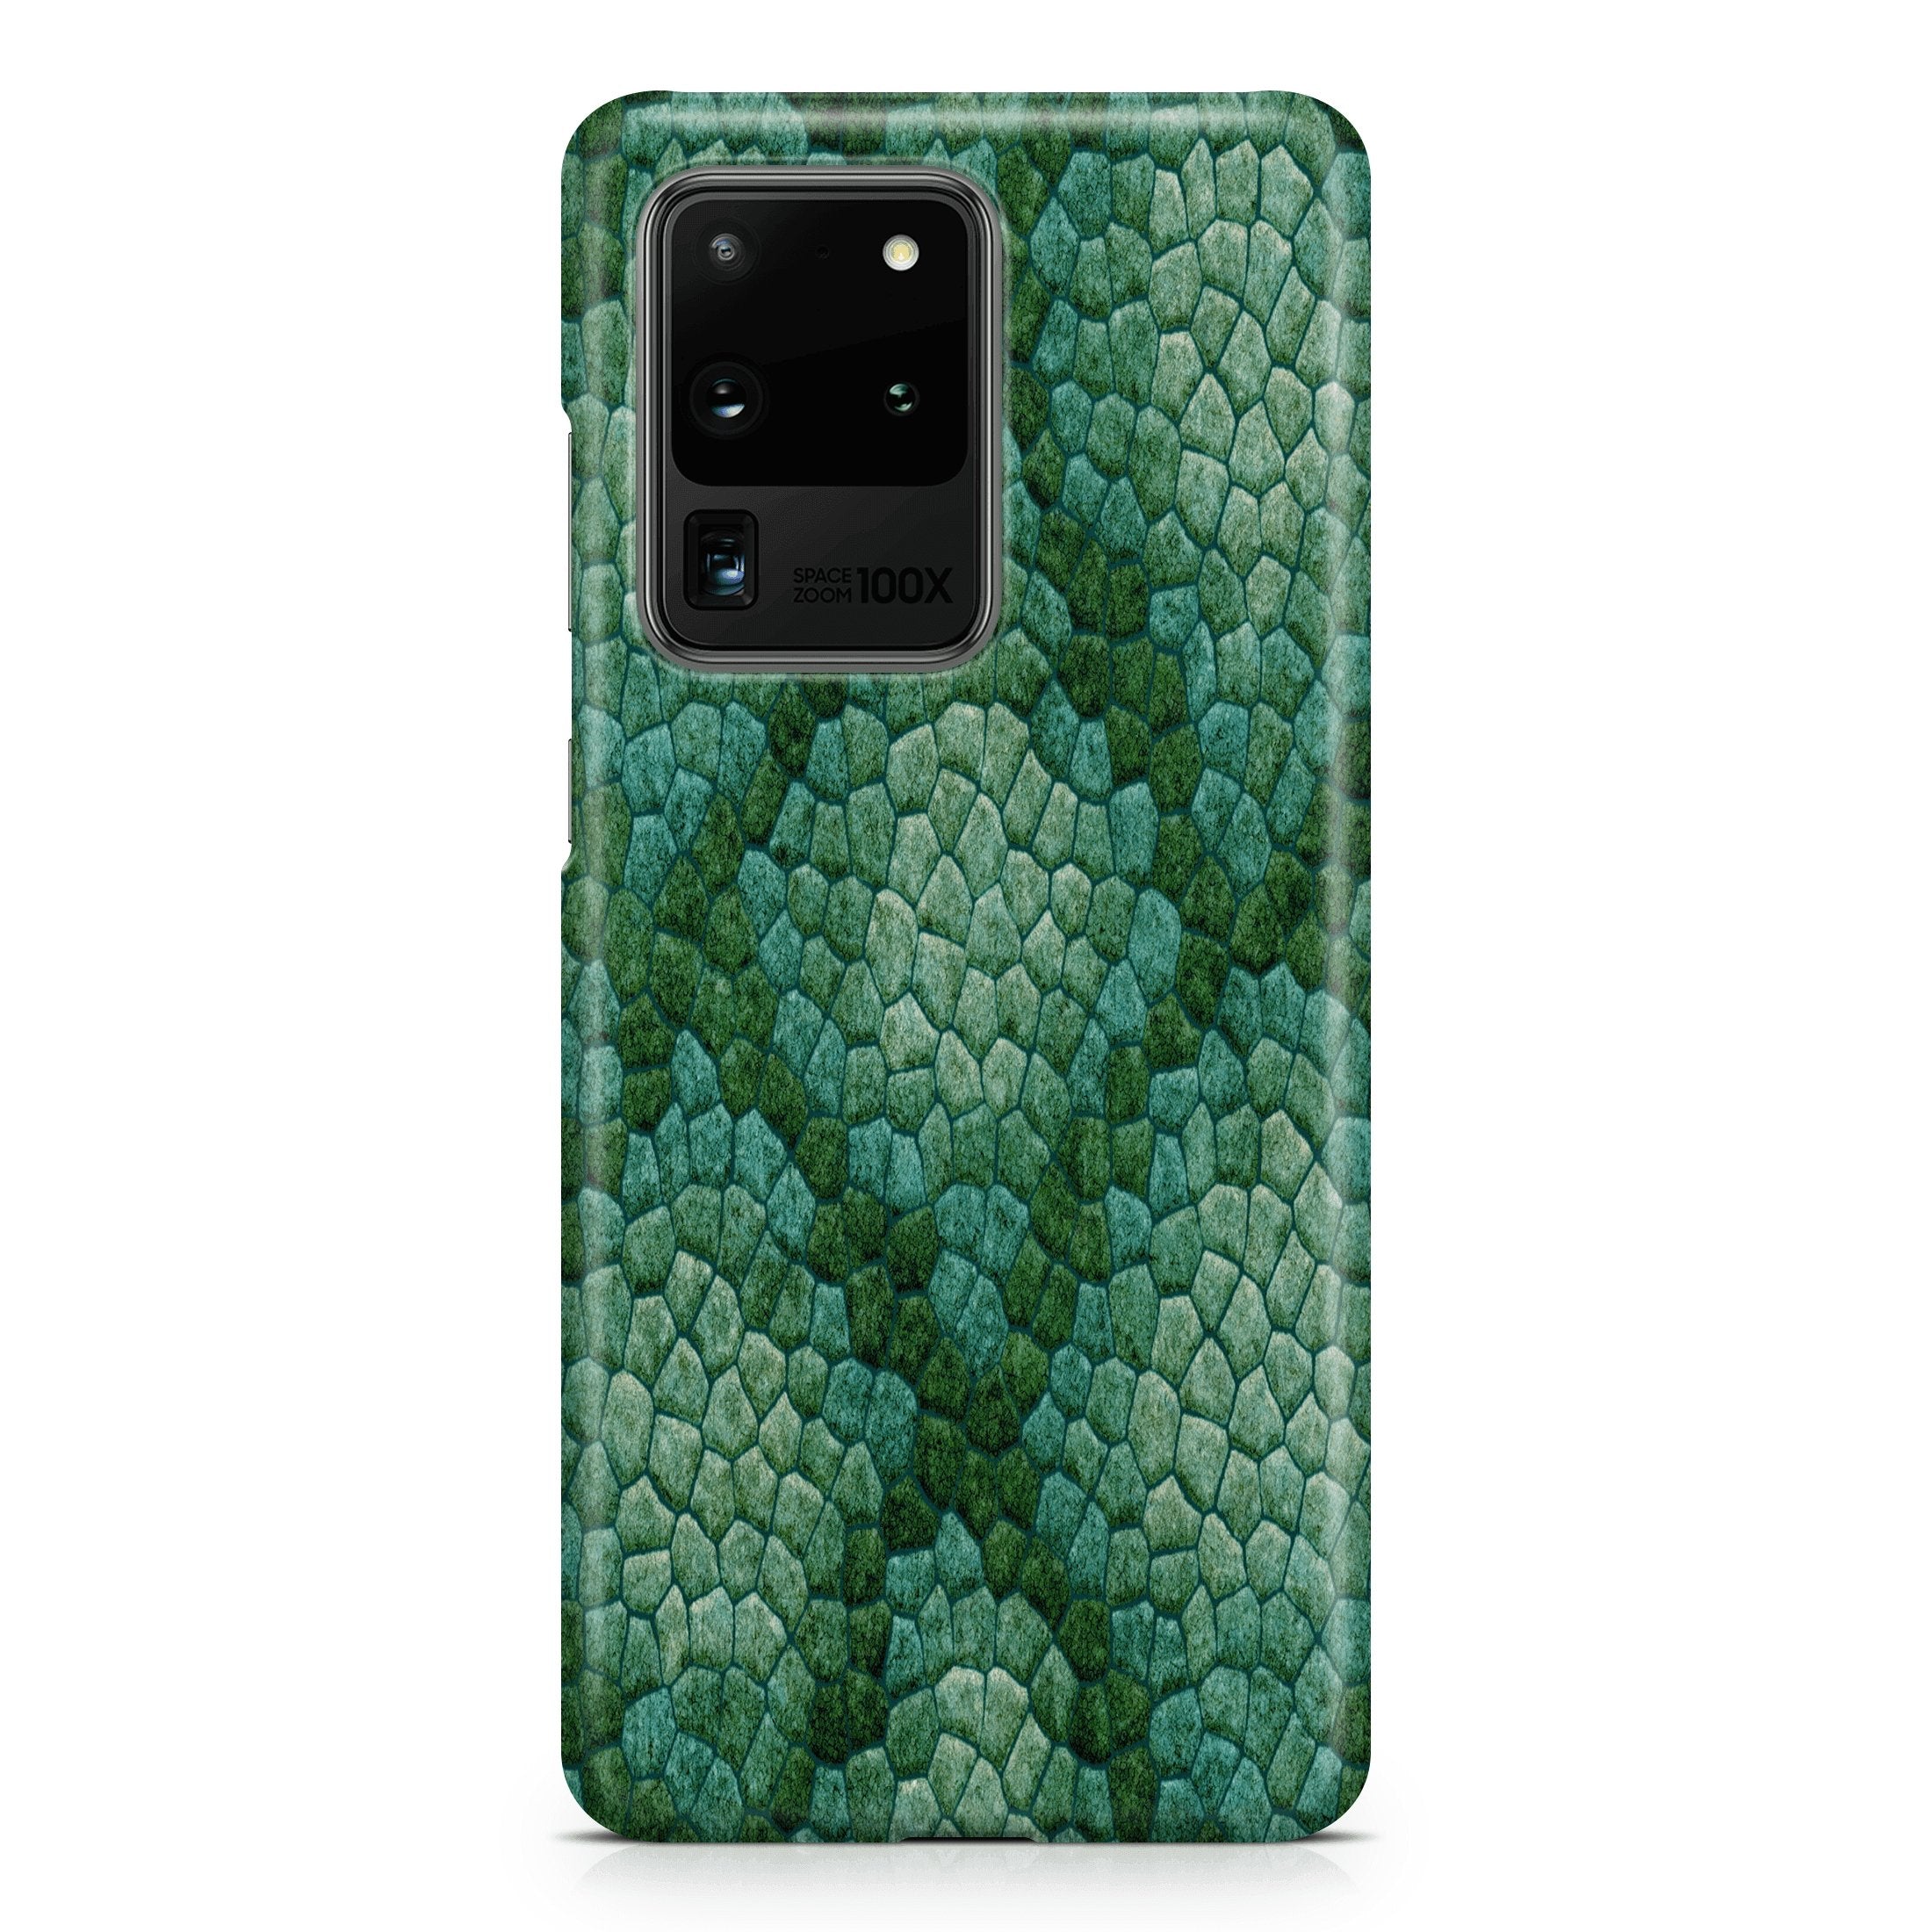 Snakeskin II - Samsung phone case designs by CaseSwagger